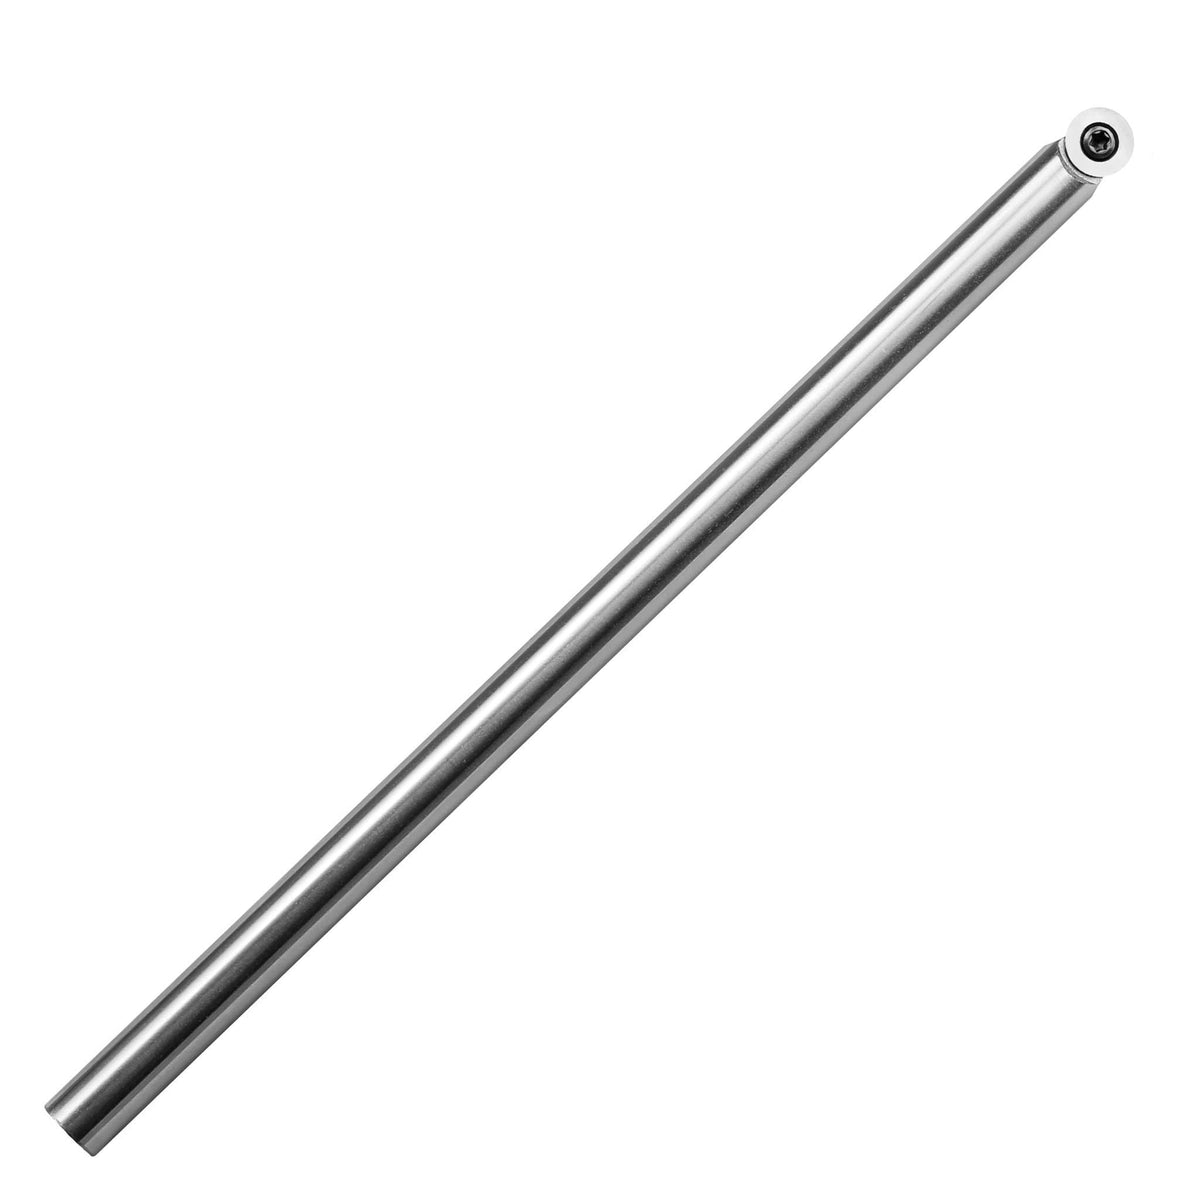 Woodturning Carbide Lathe Tool Finisher Shaft Round Tip with 12mm Insert-1